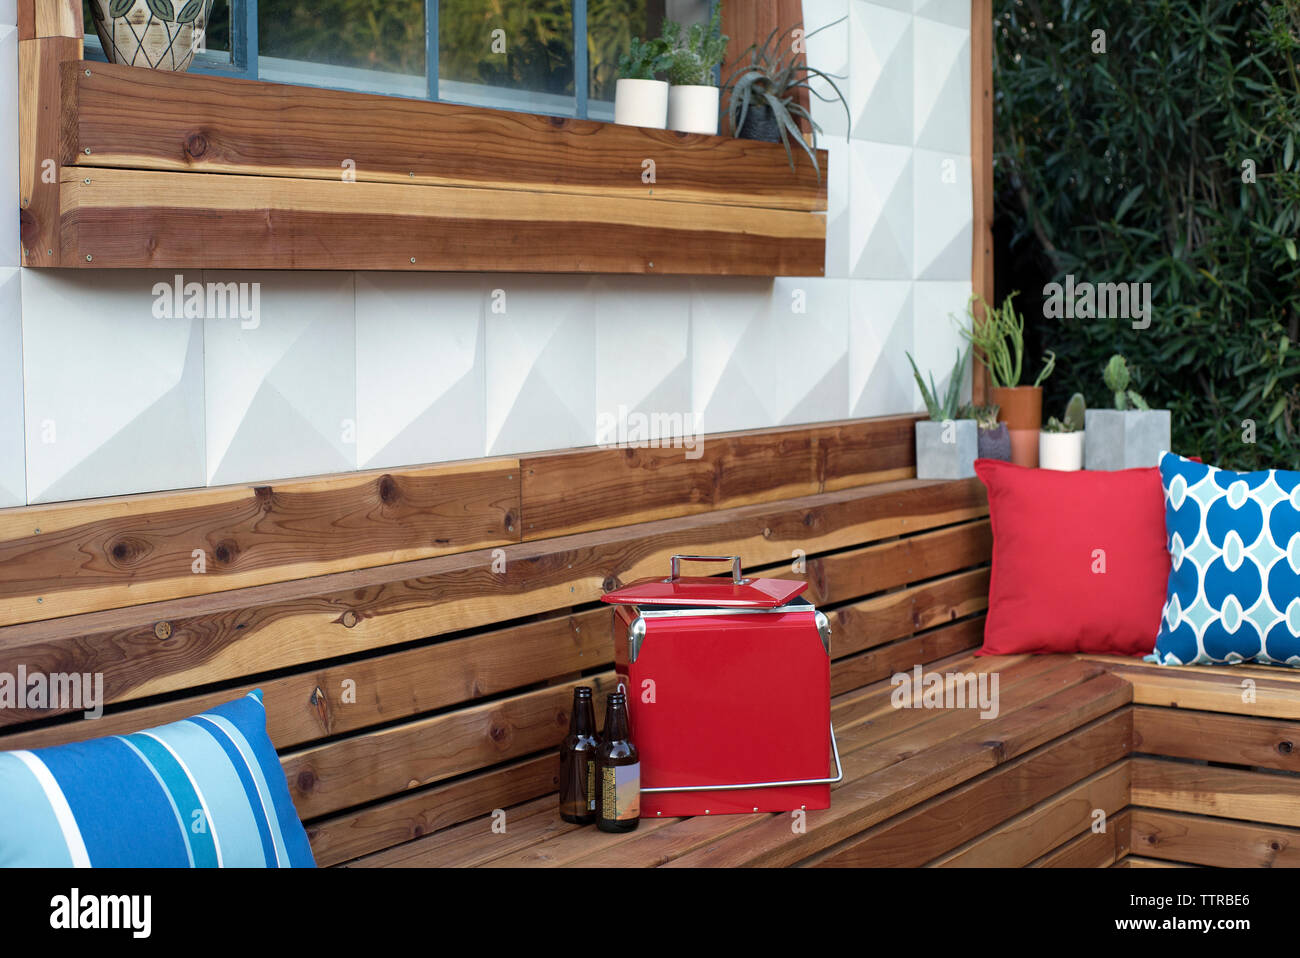 Beer bottles and cooler on wooden bench in backyard Stock Photo